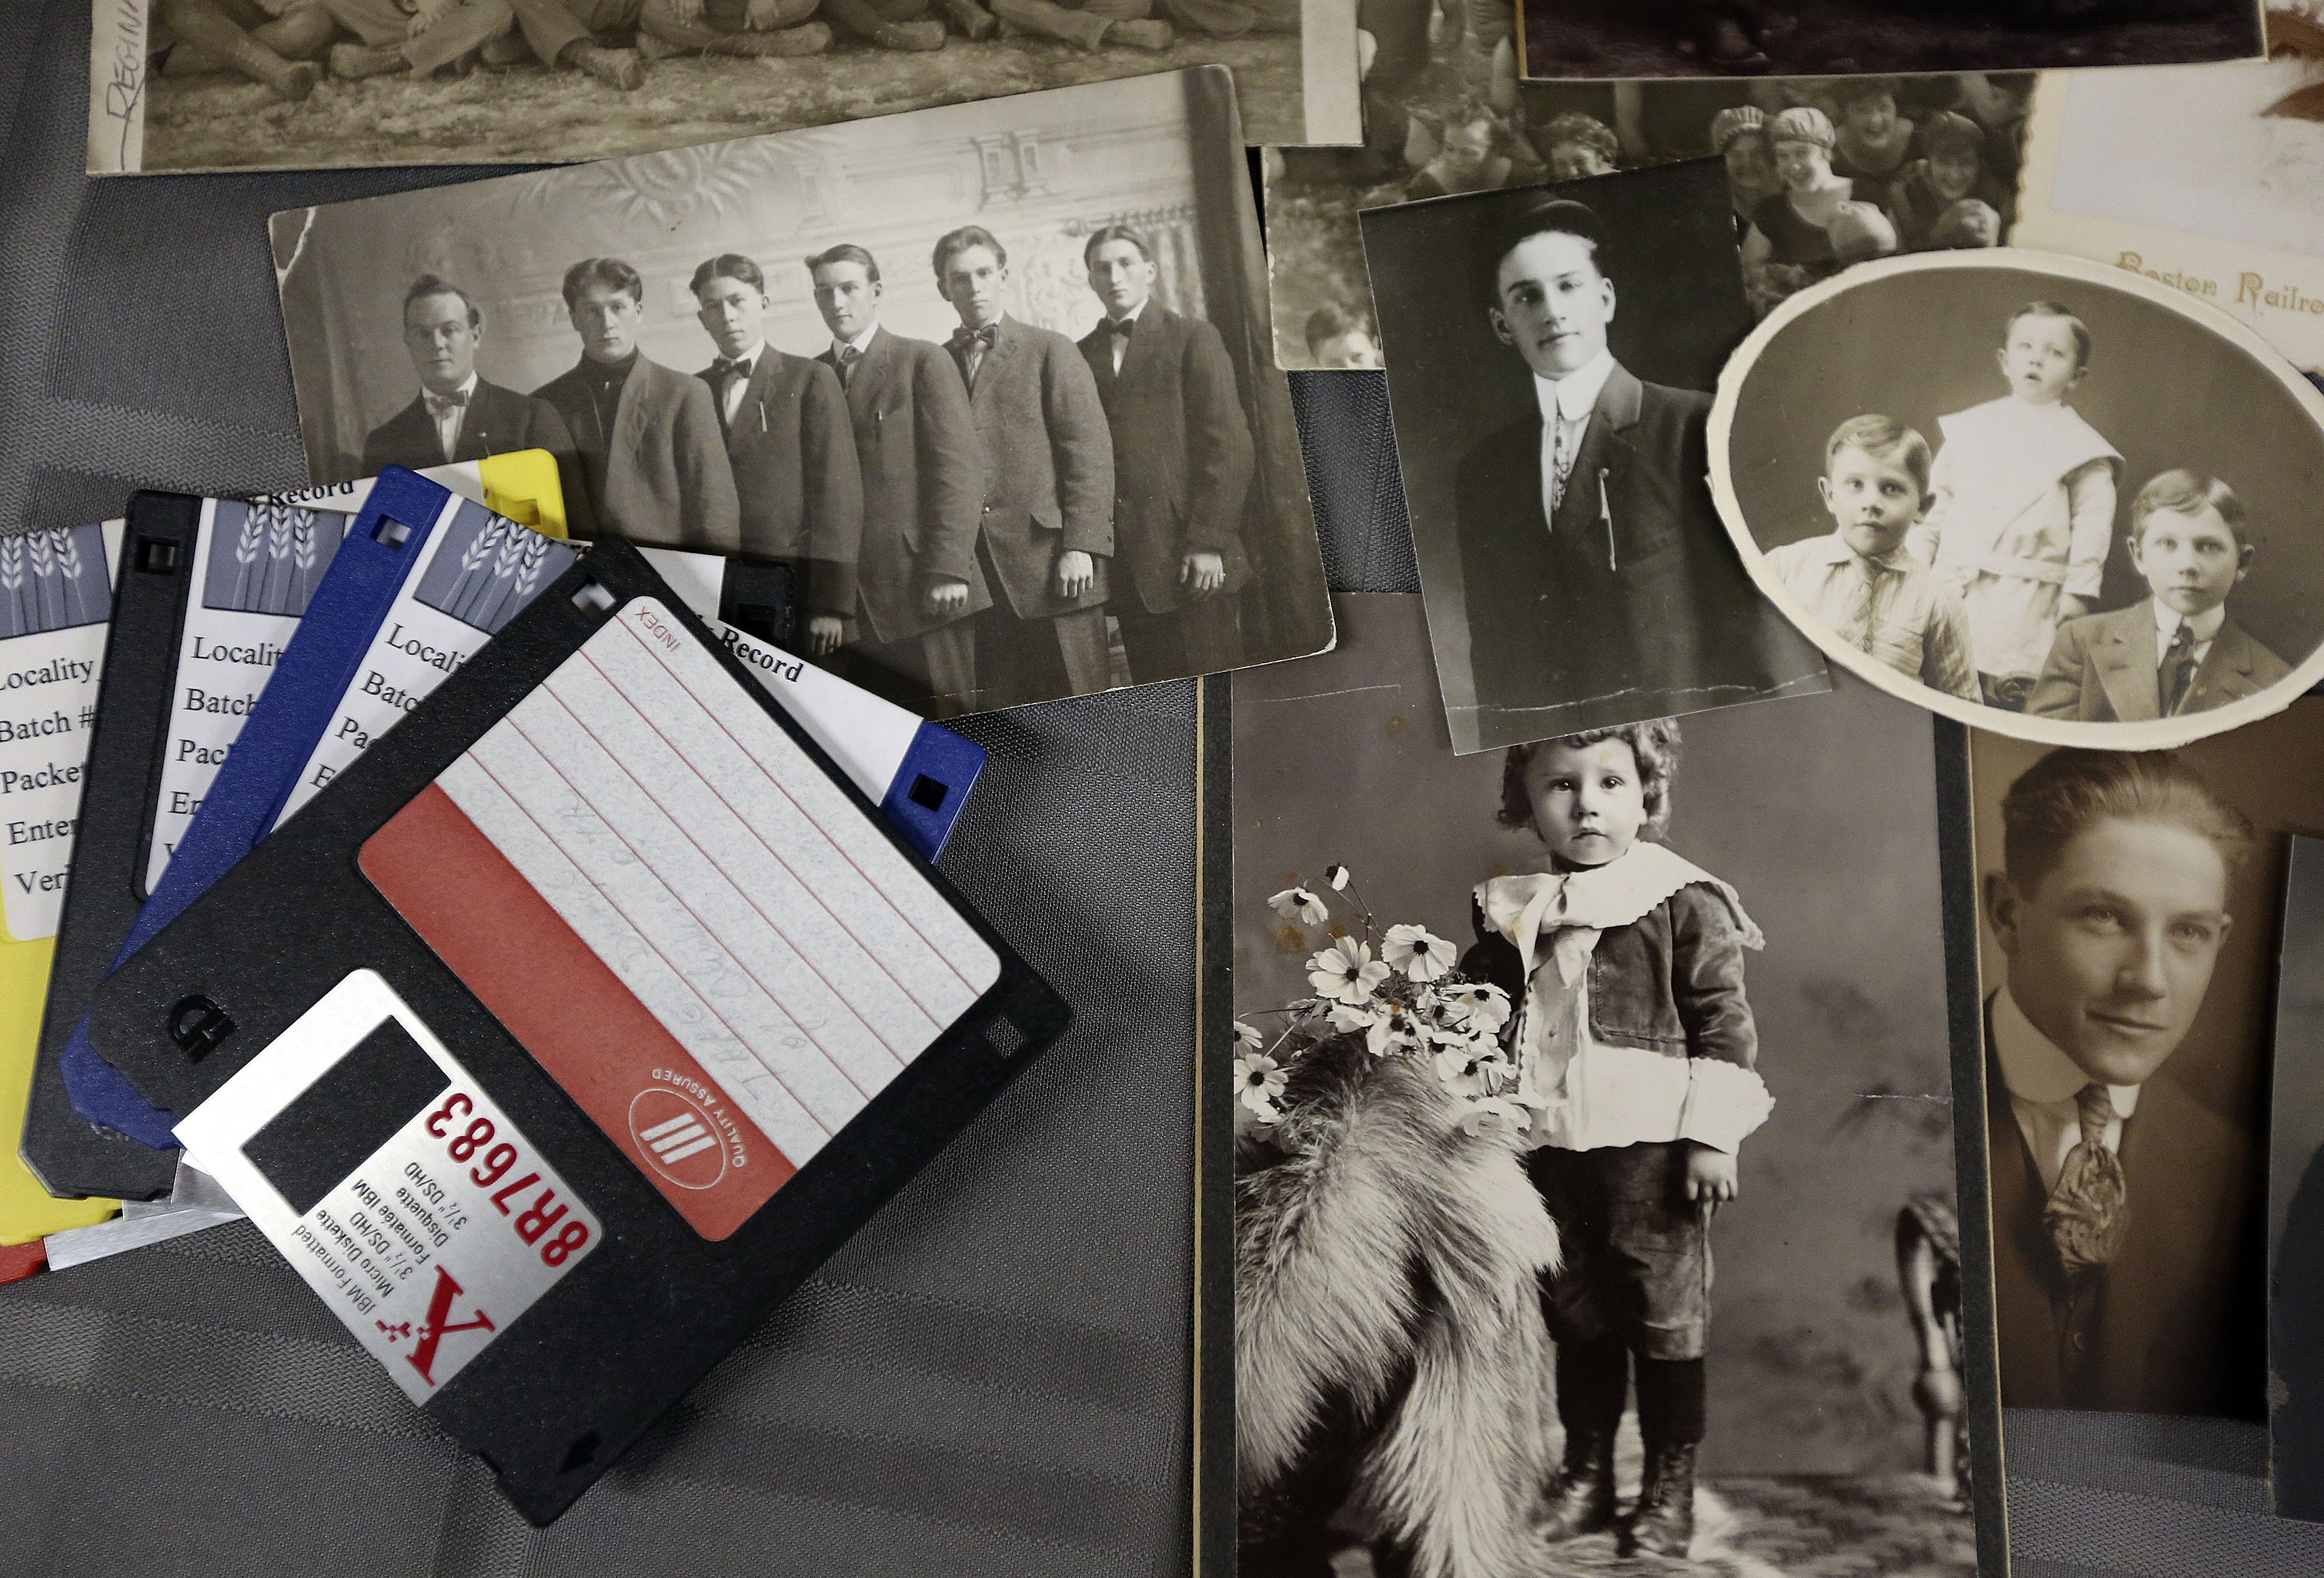 Display of historical photos and hard disks during the FamilySearch 125th anniversary celebration at the Family History Library in Salt Lake City on Wednesday, Nov. 13, 2019.